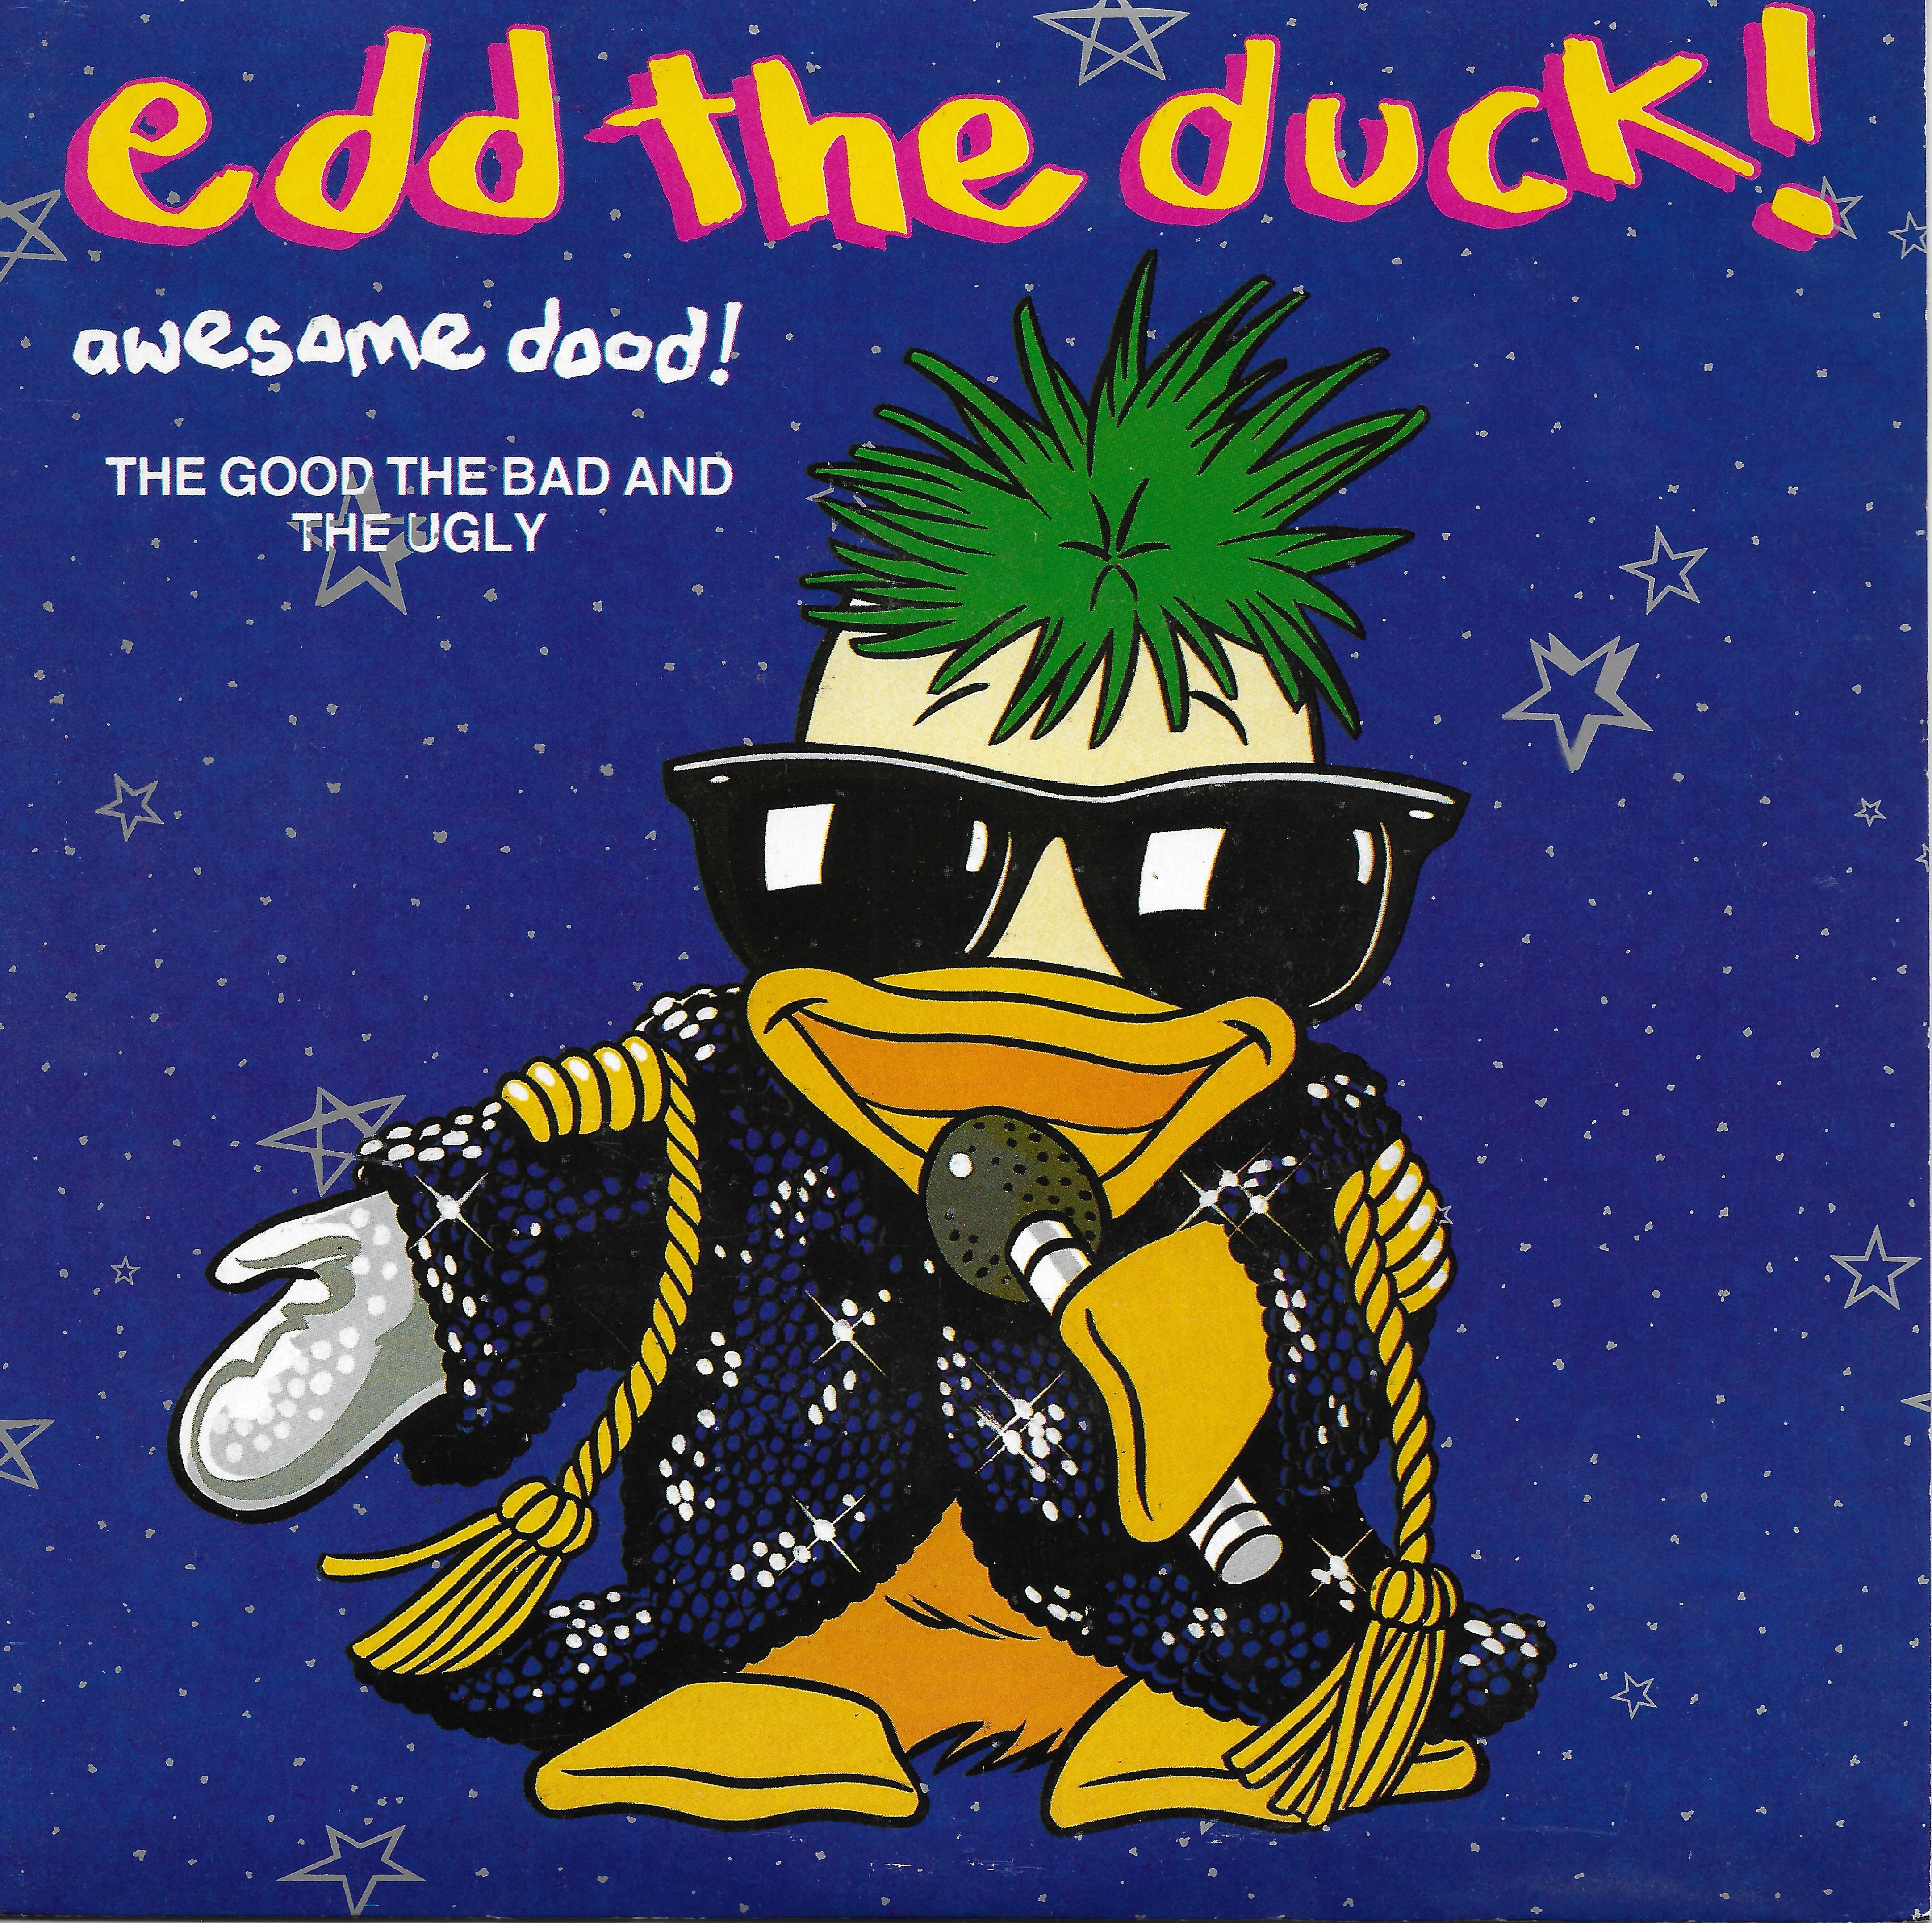 Picture of Awesome dood! by artist Edd The Duck from the BBC singles - Records and Tapes library